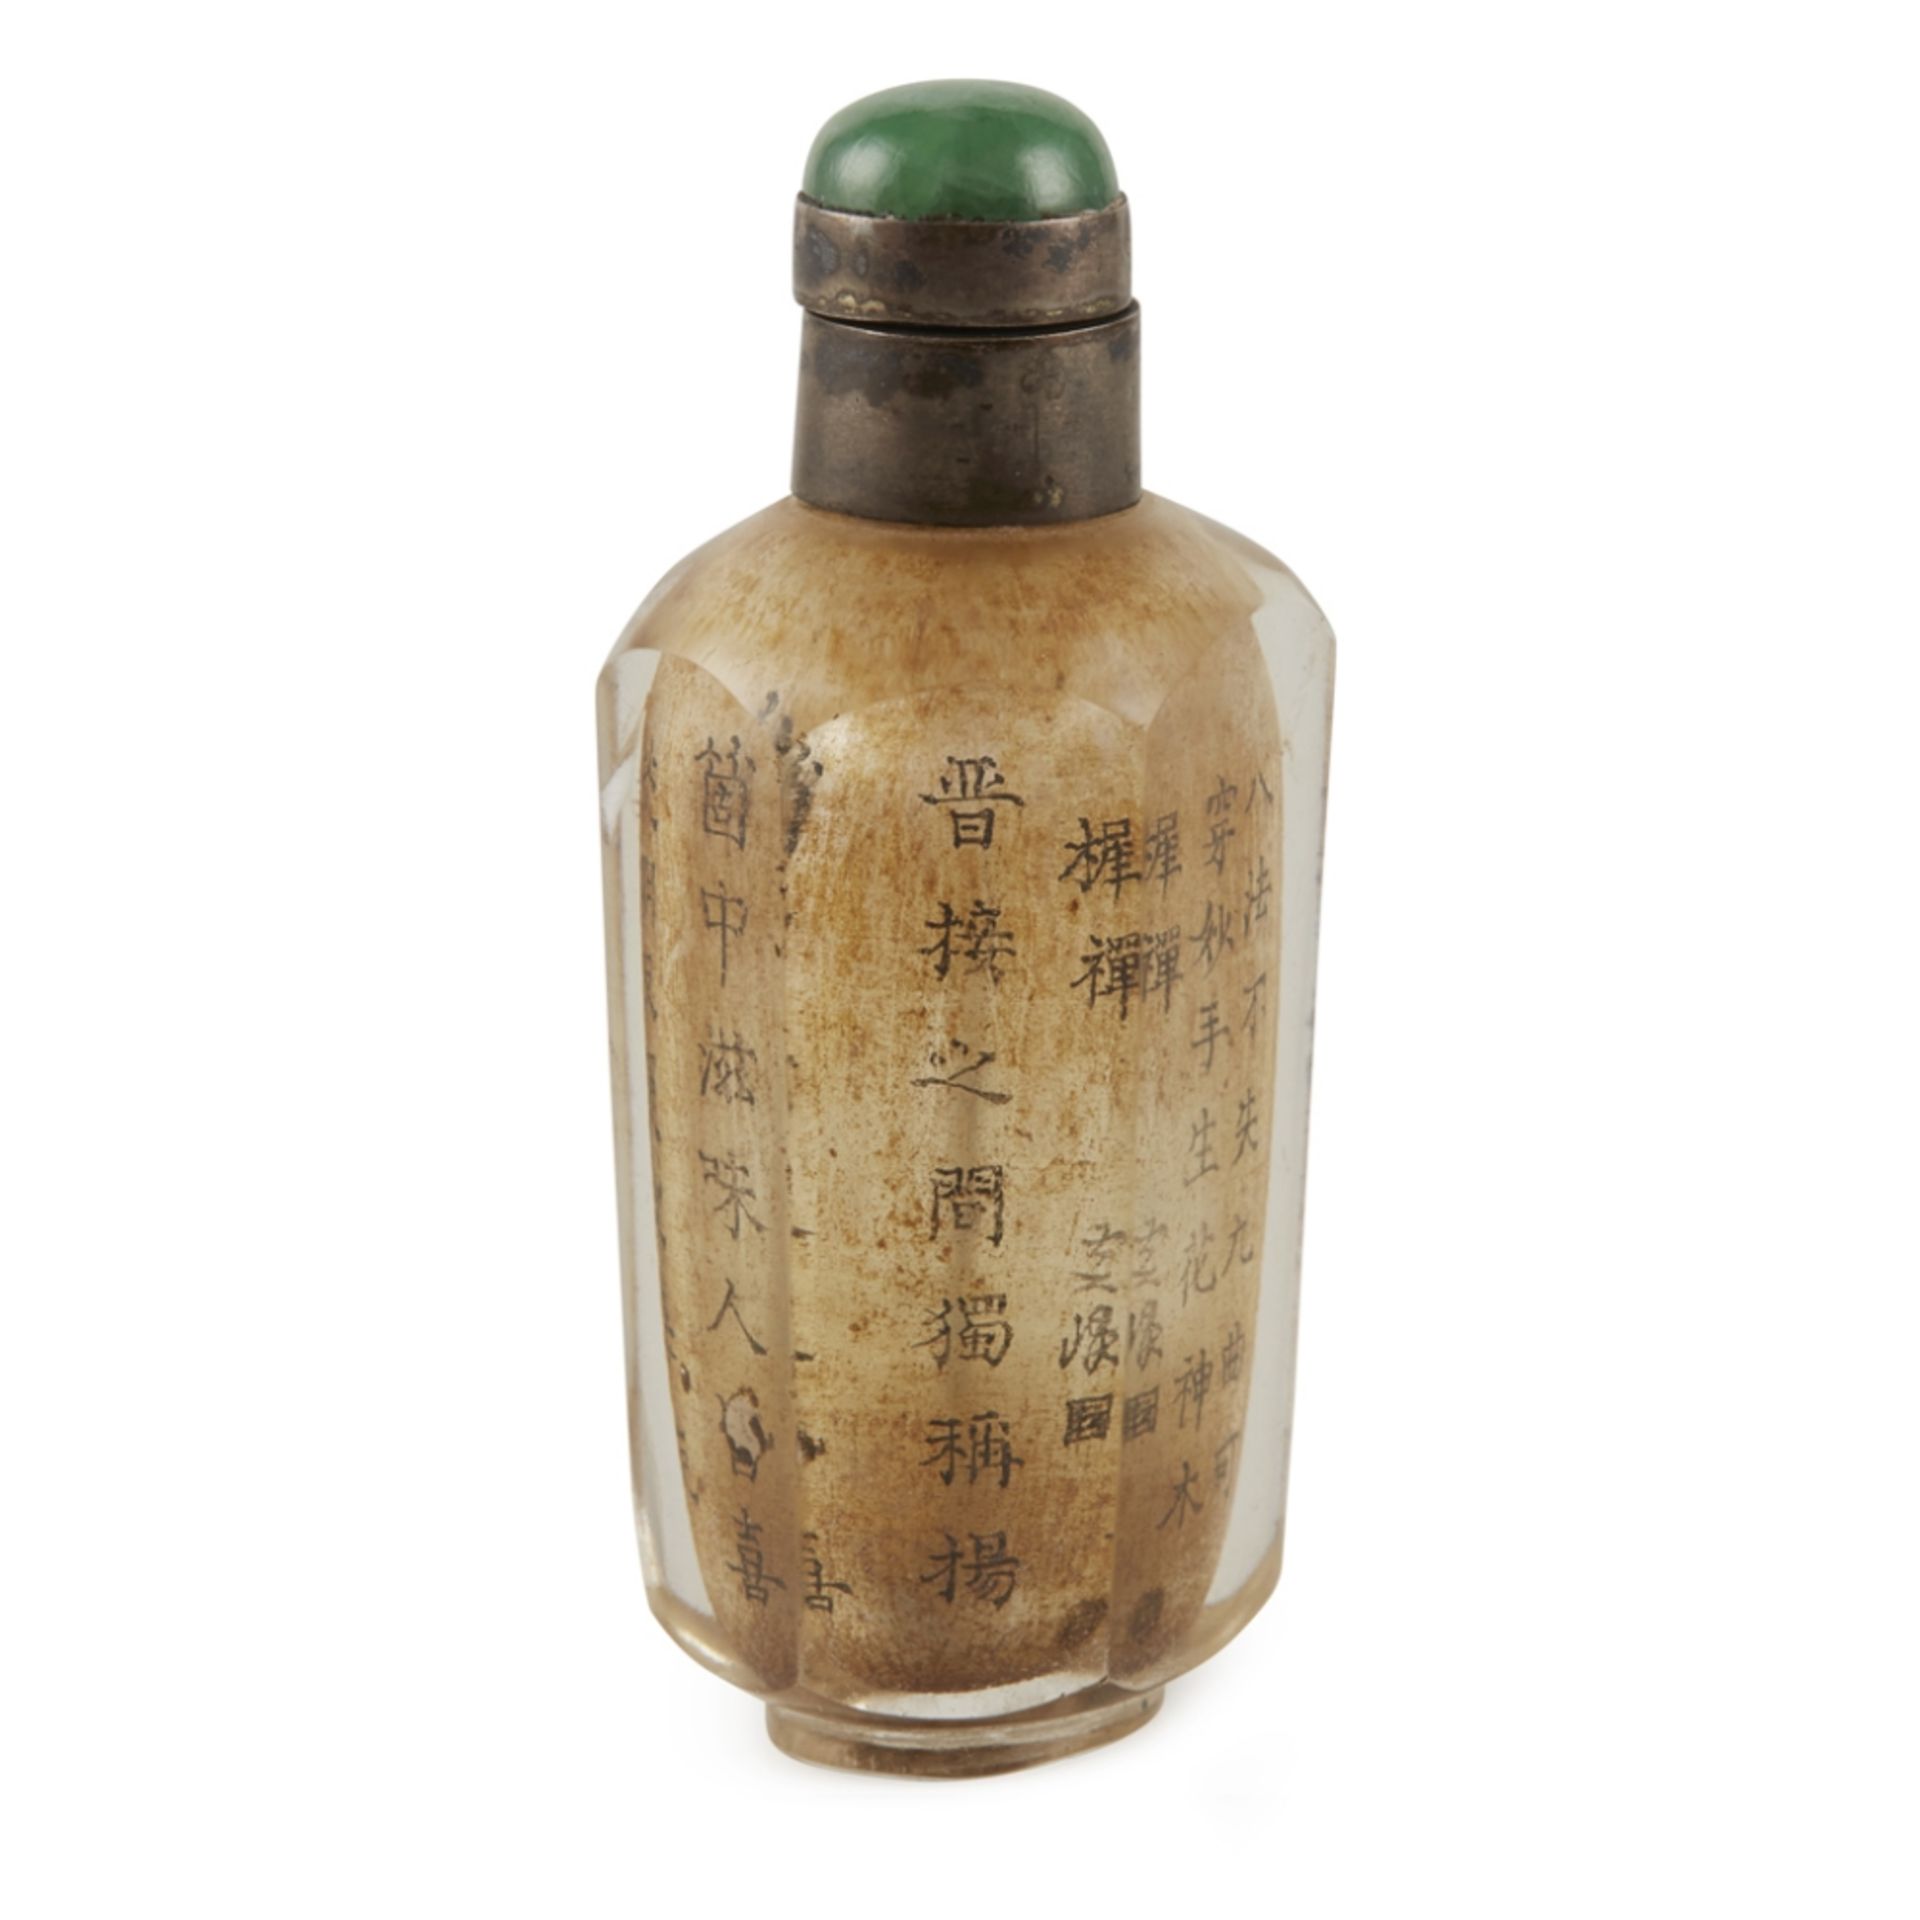 RARE INSIDE-INSCRIBED ROCK CRYSTAL SNUFF BOTTLESIGNED BAN SHAN AND YUN FENG, EARLY 19TH CENTURY of - Image 6 of 6